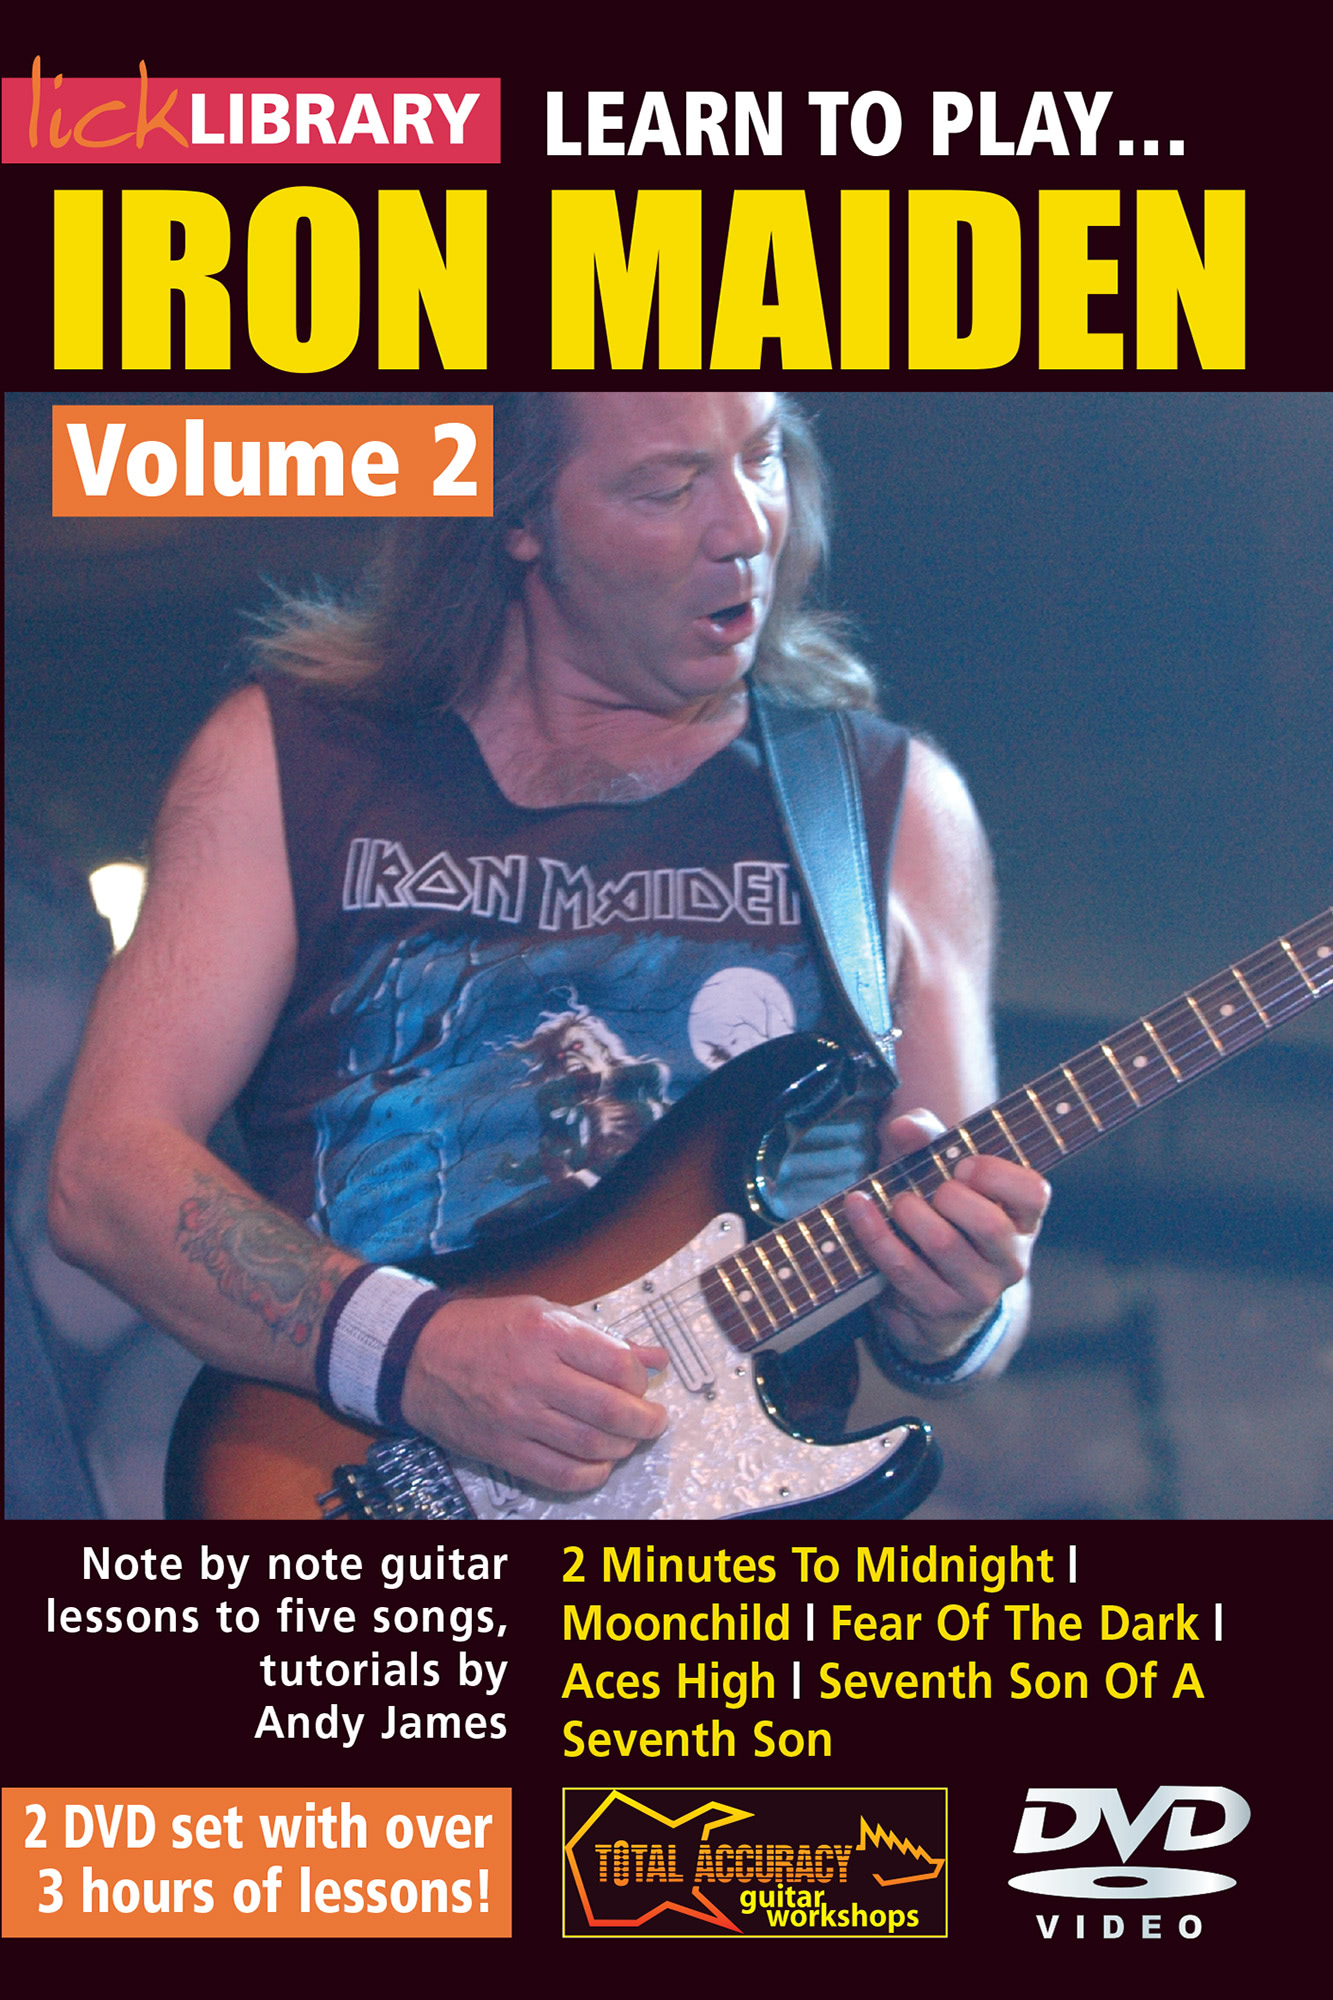 Learn To Play Iron Maiden Volume 2